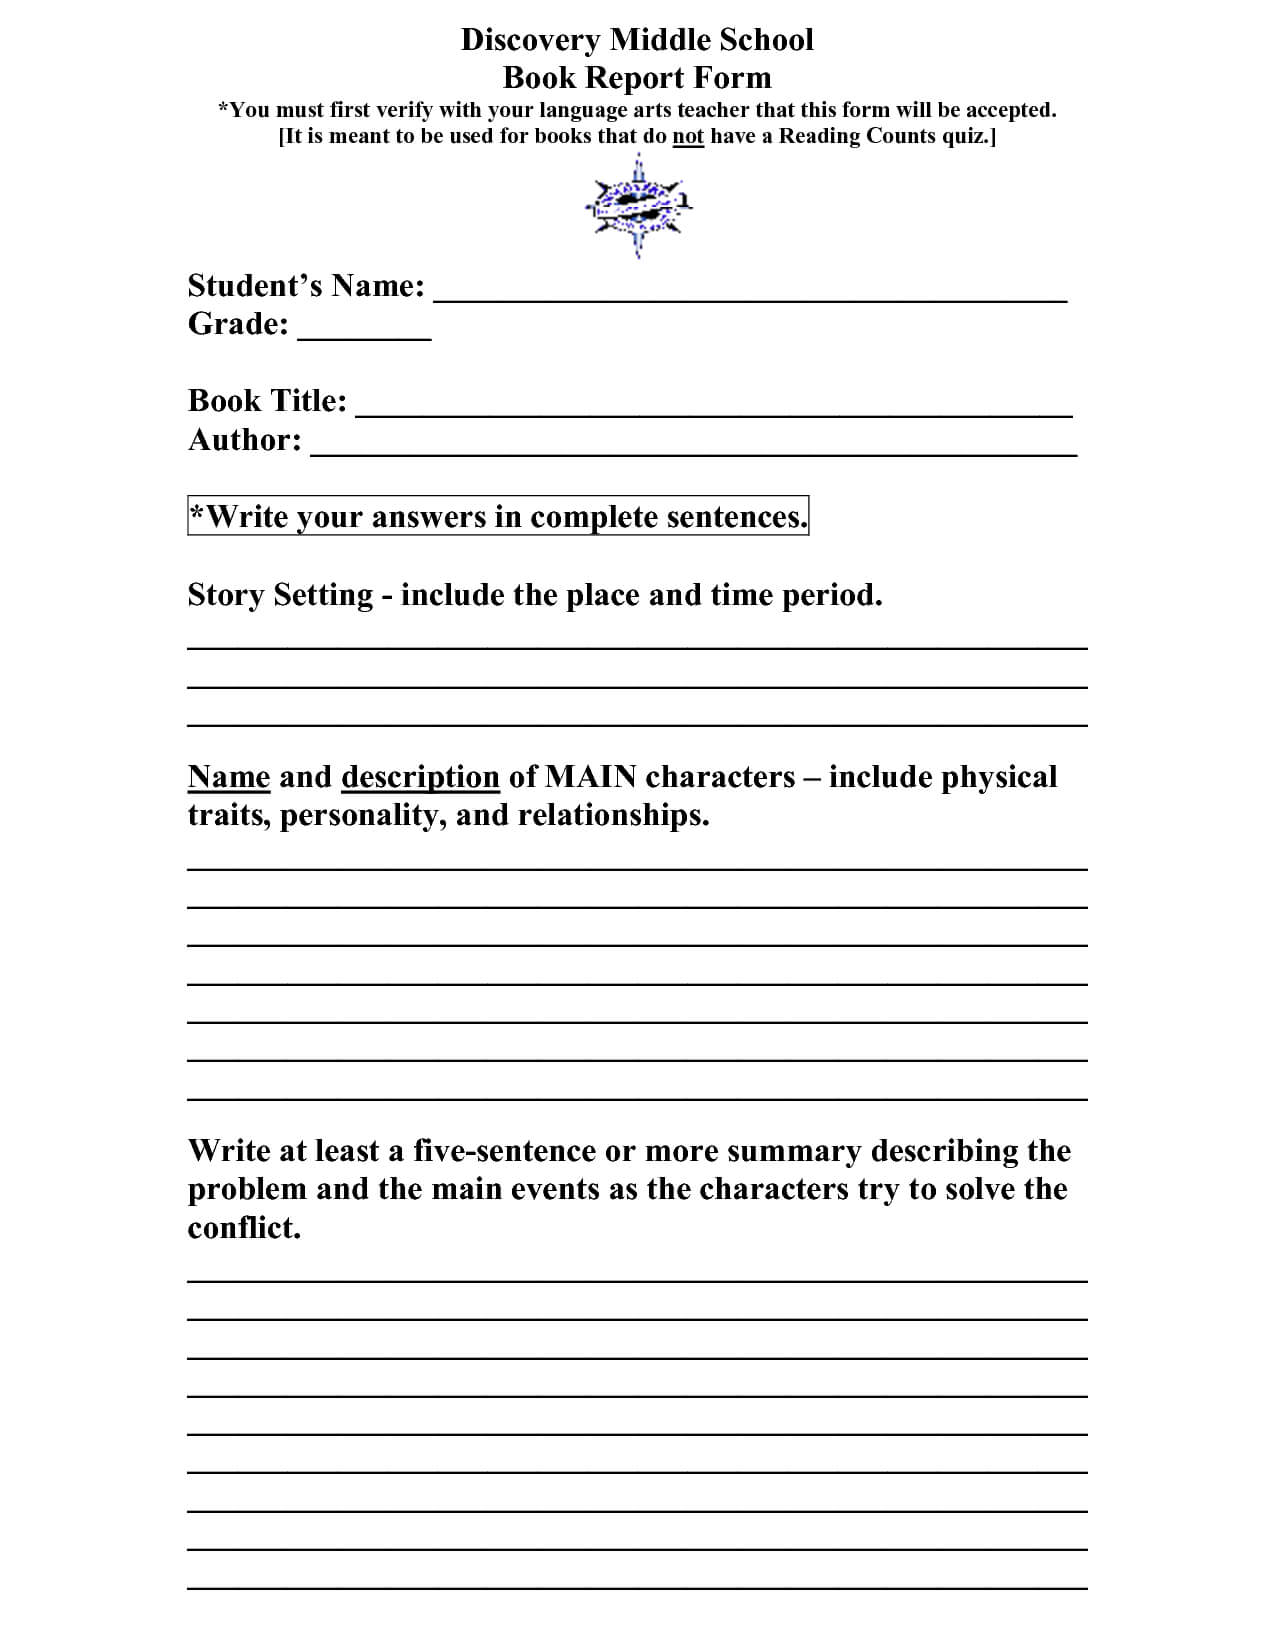 Scope Of Work Template | Book Report Templates, High School Throughout High School Book Report Template